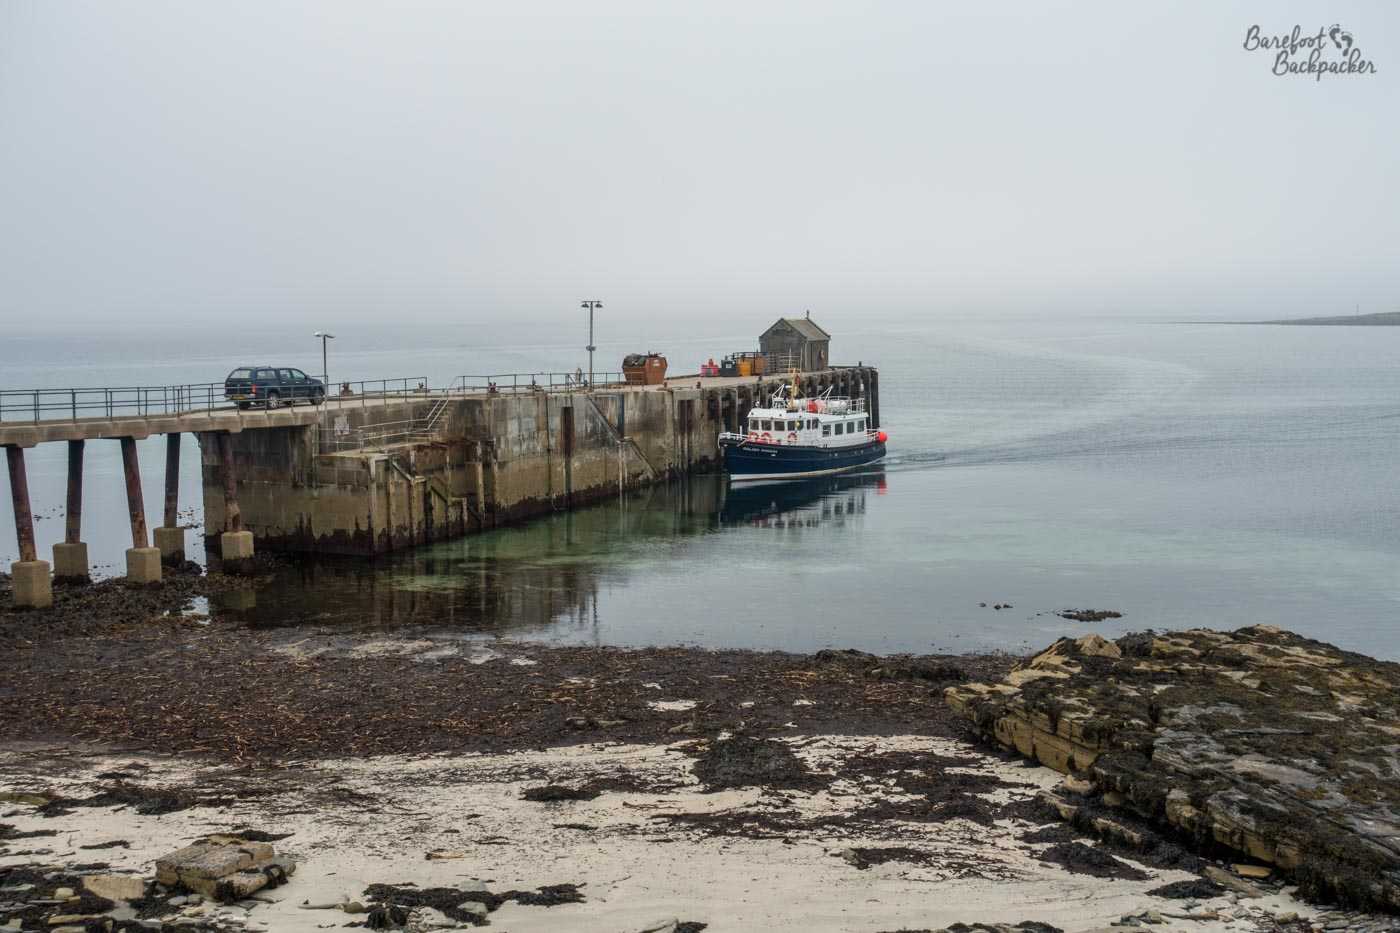 A small ferry slides up to a high stone quayside. There's a car on the quayside waiting to pick up or drop off passengers. In the foreground a beach slopes down to the water.